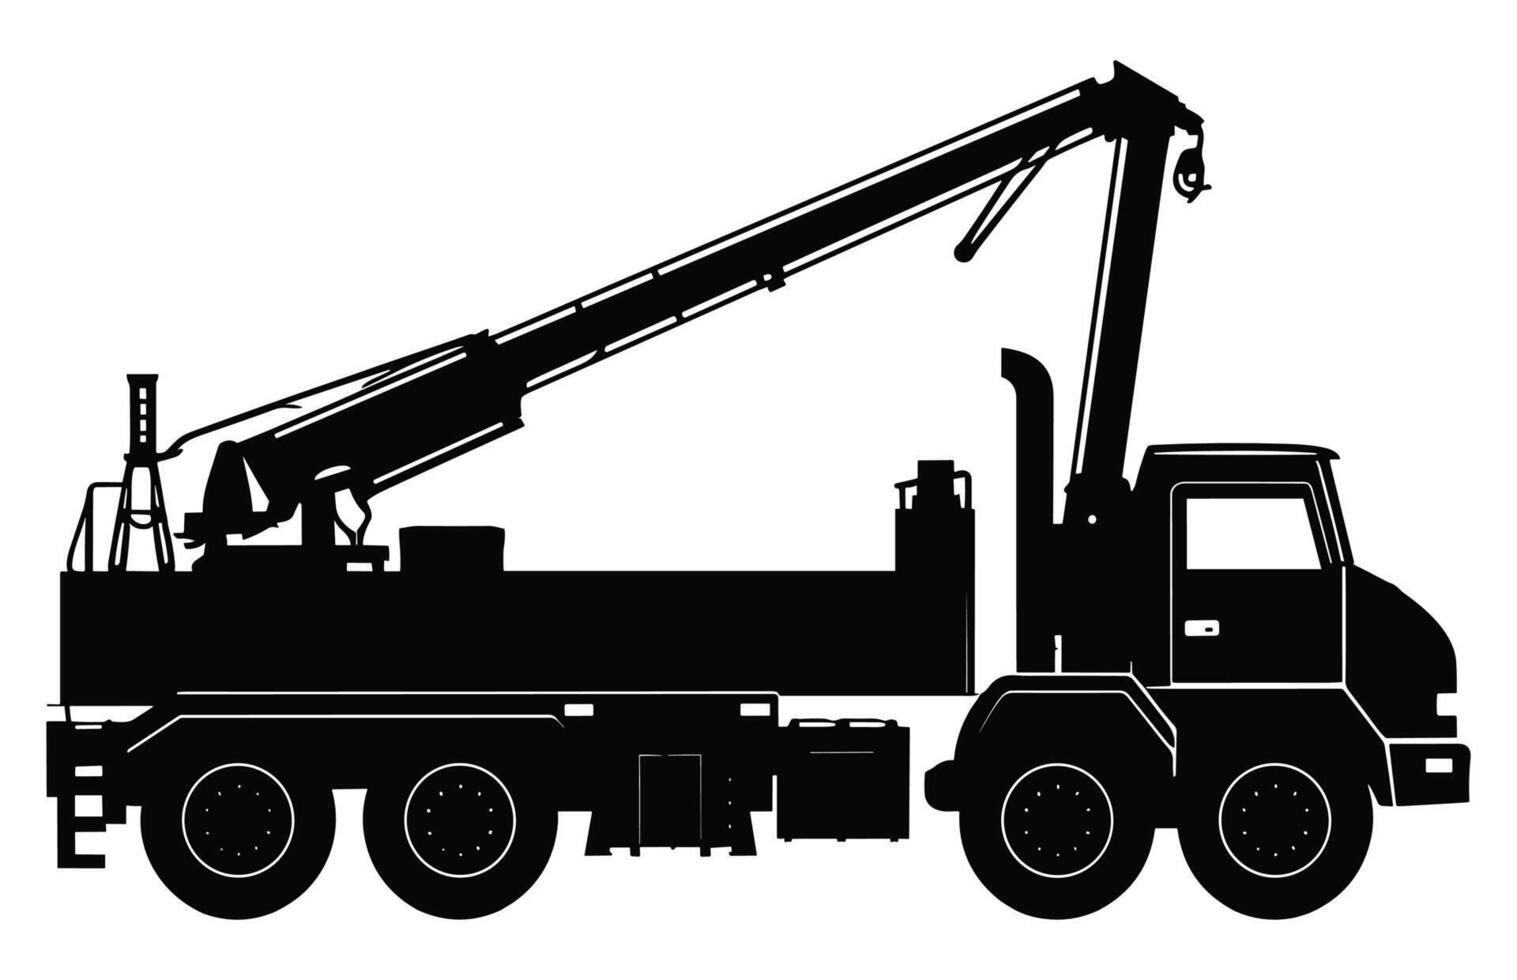 Mobile Crane Truck Silhouette vector isolated on a white background